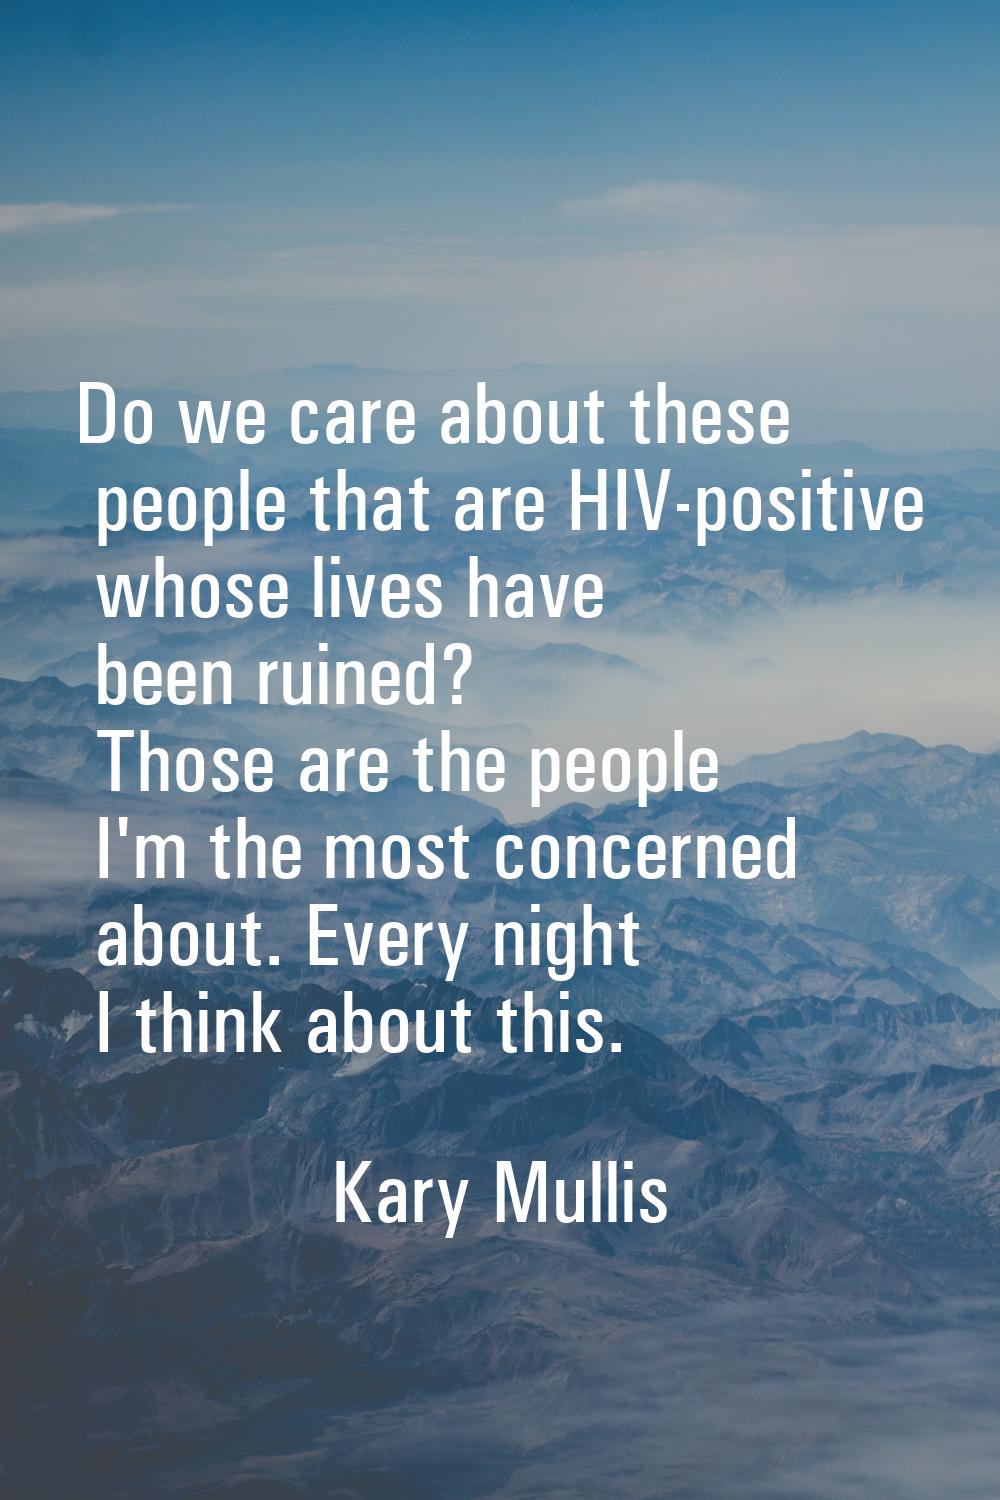 Do we care about these people that are HIV-positive whose lives have been ruined? Those are the peo